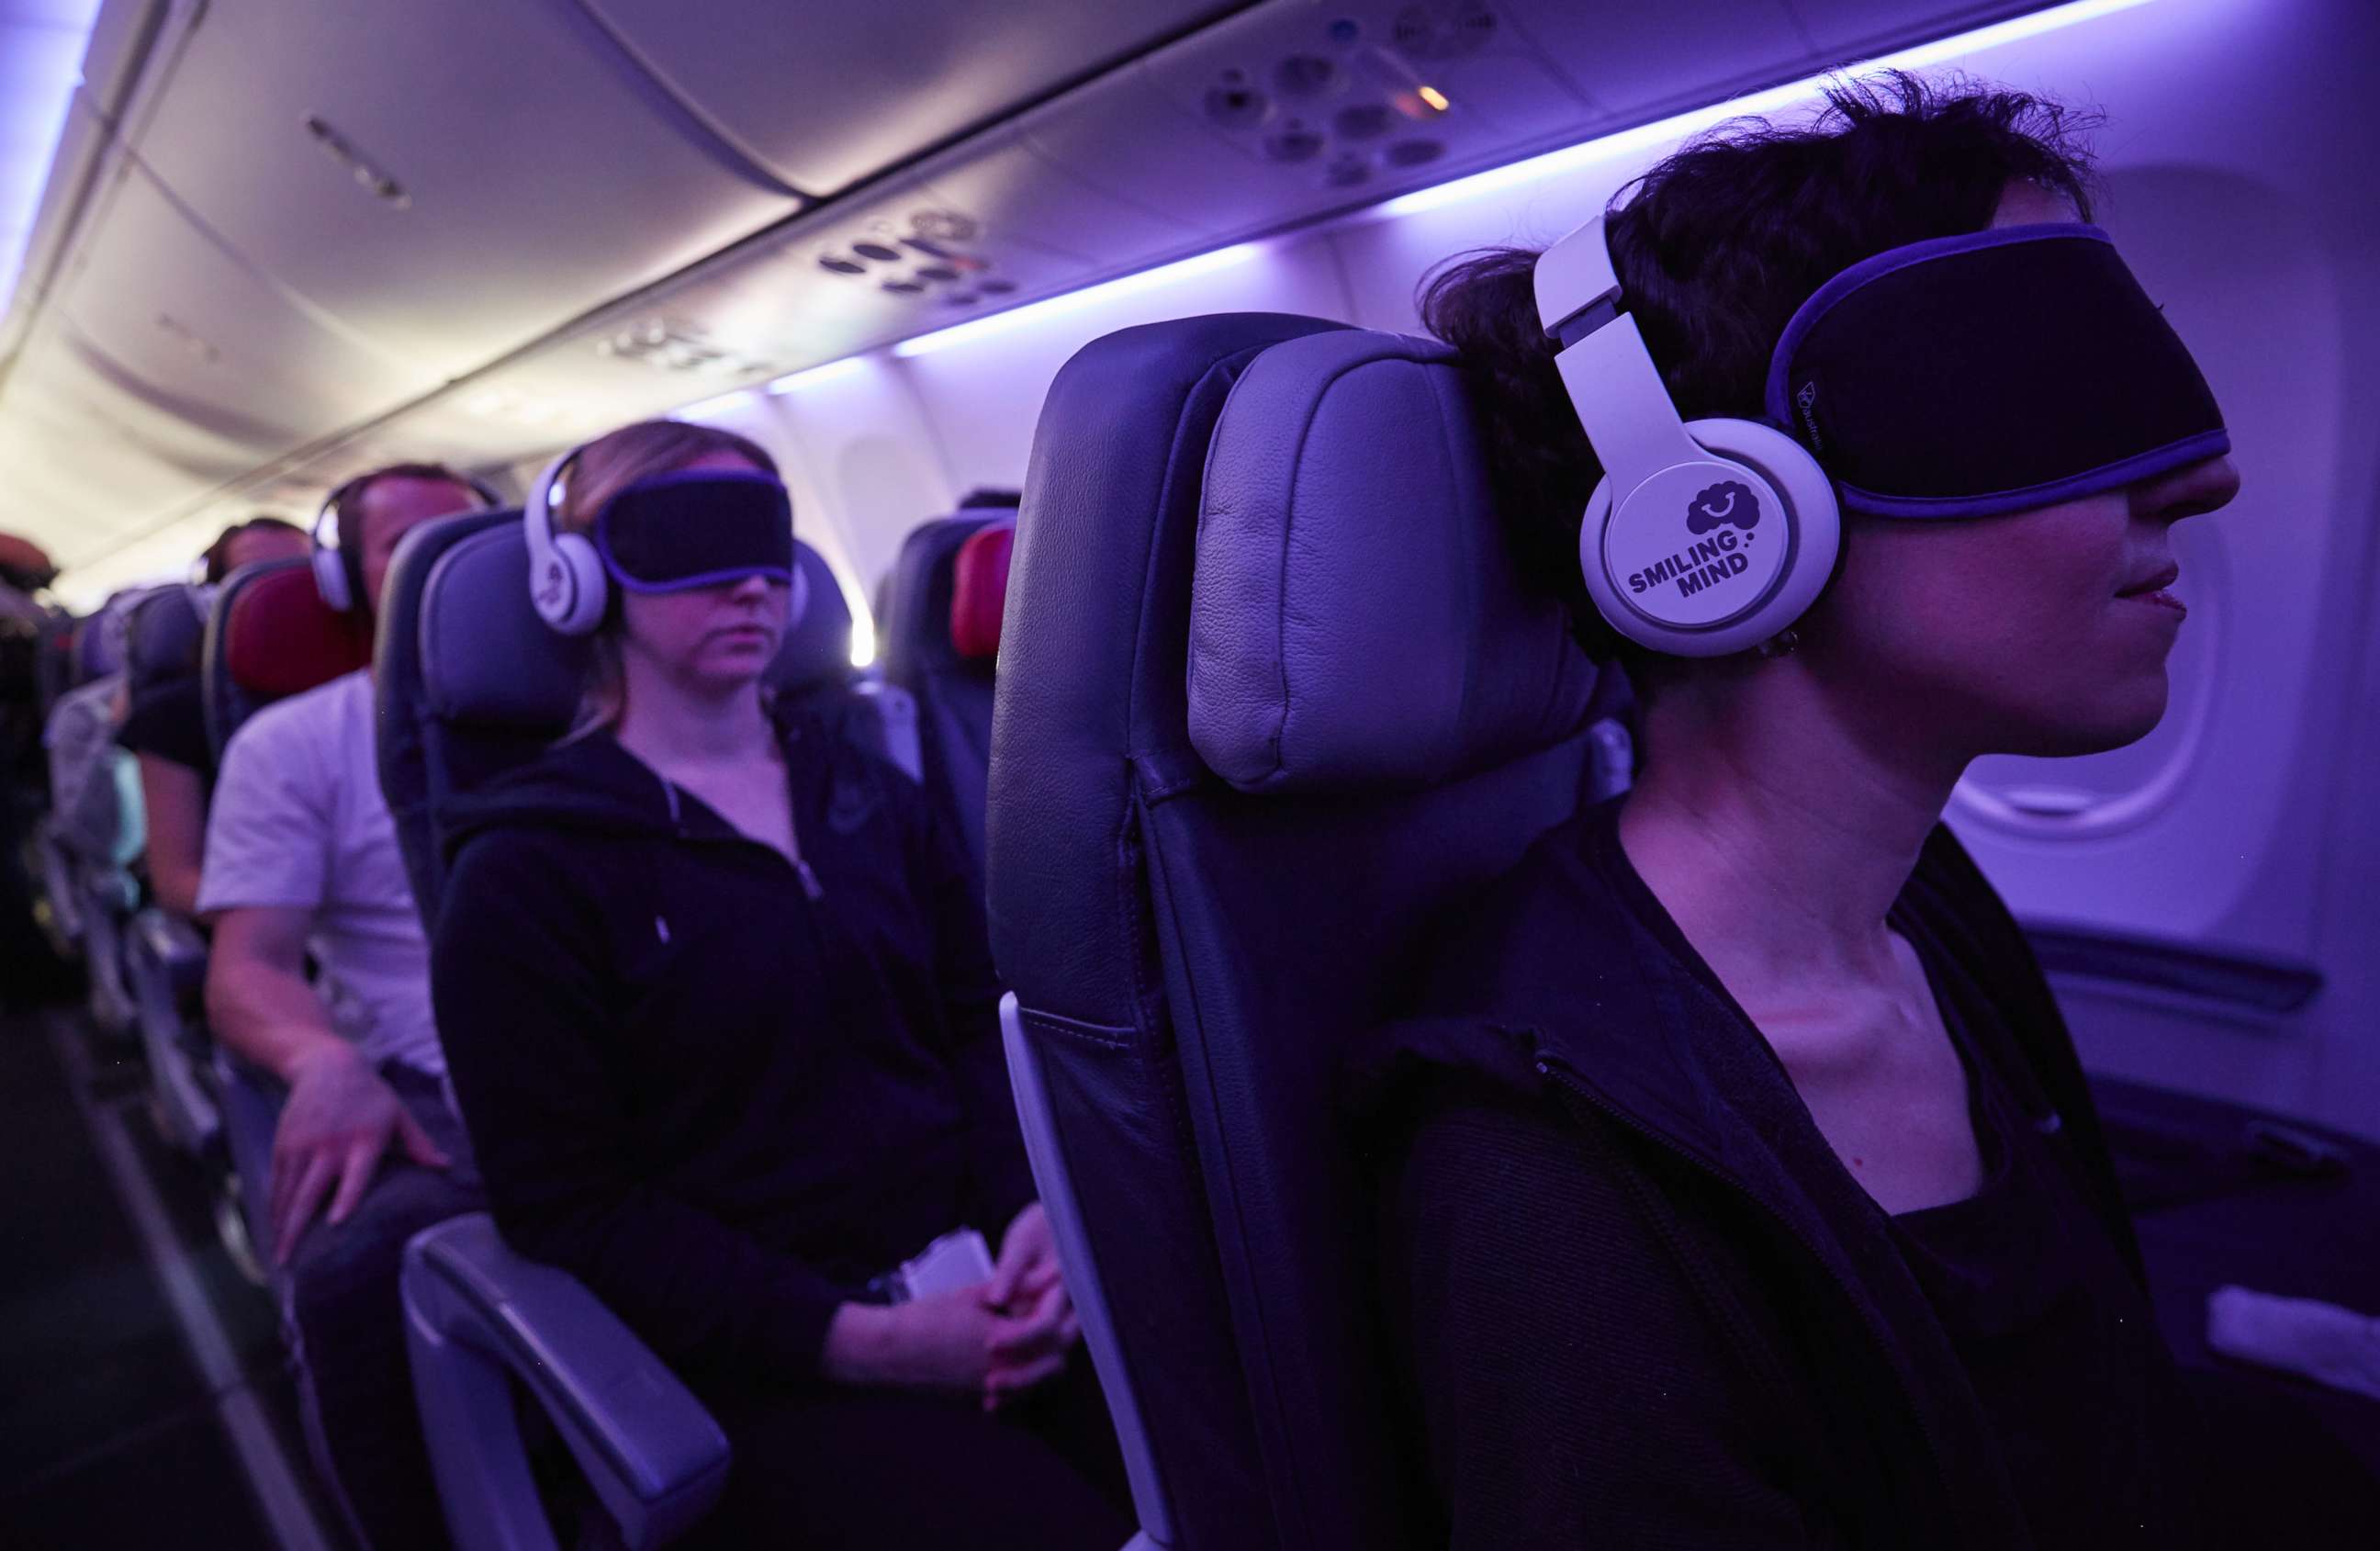 PHOTO: Passengers use headphones and eye masks to relax while on an airplane. 